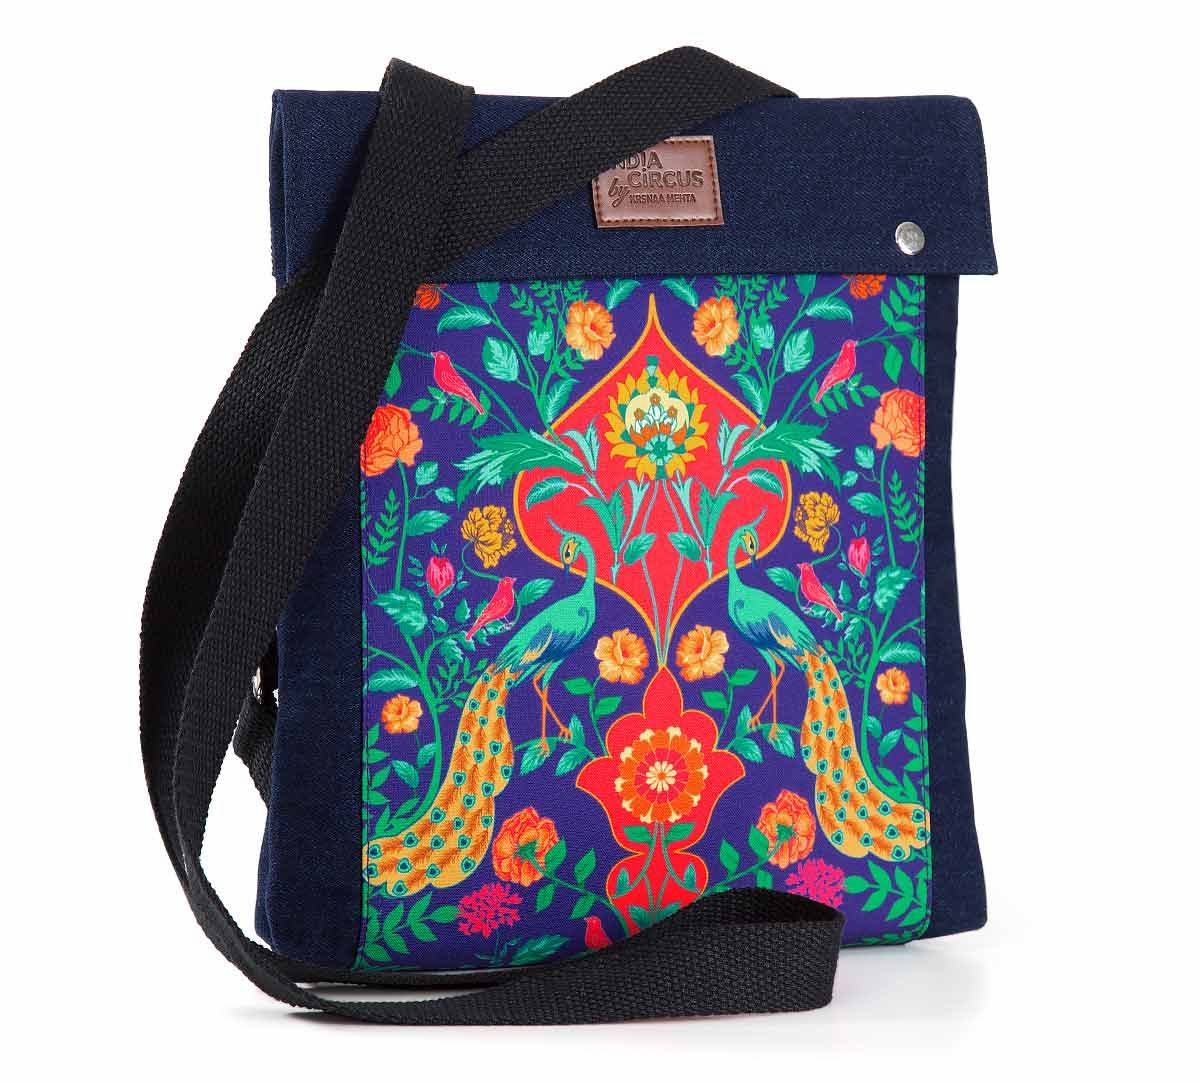 India Circus Peacock Outburst Sling Denim Backpack